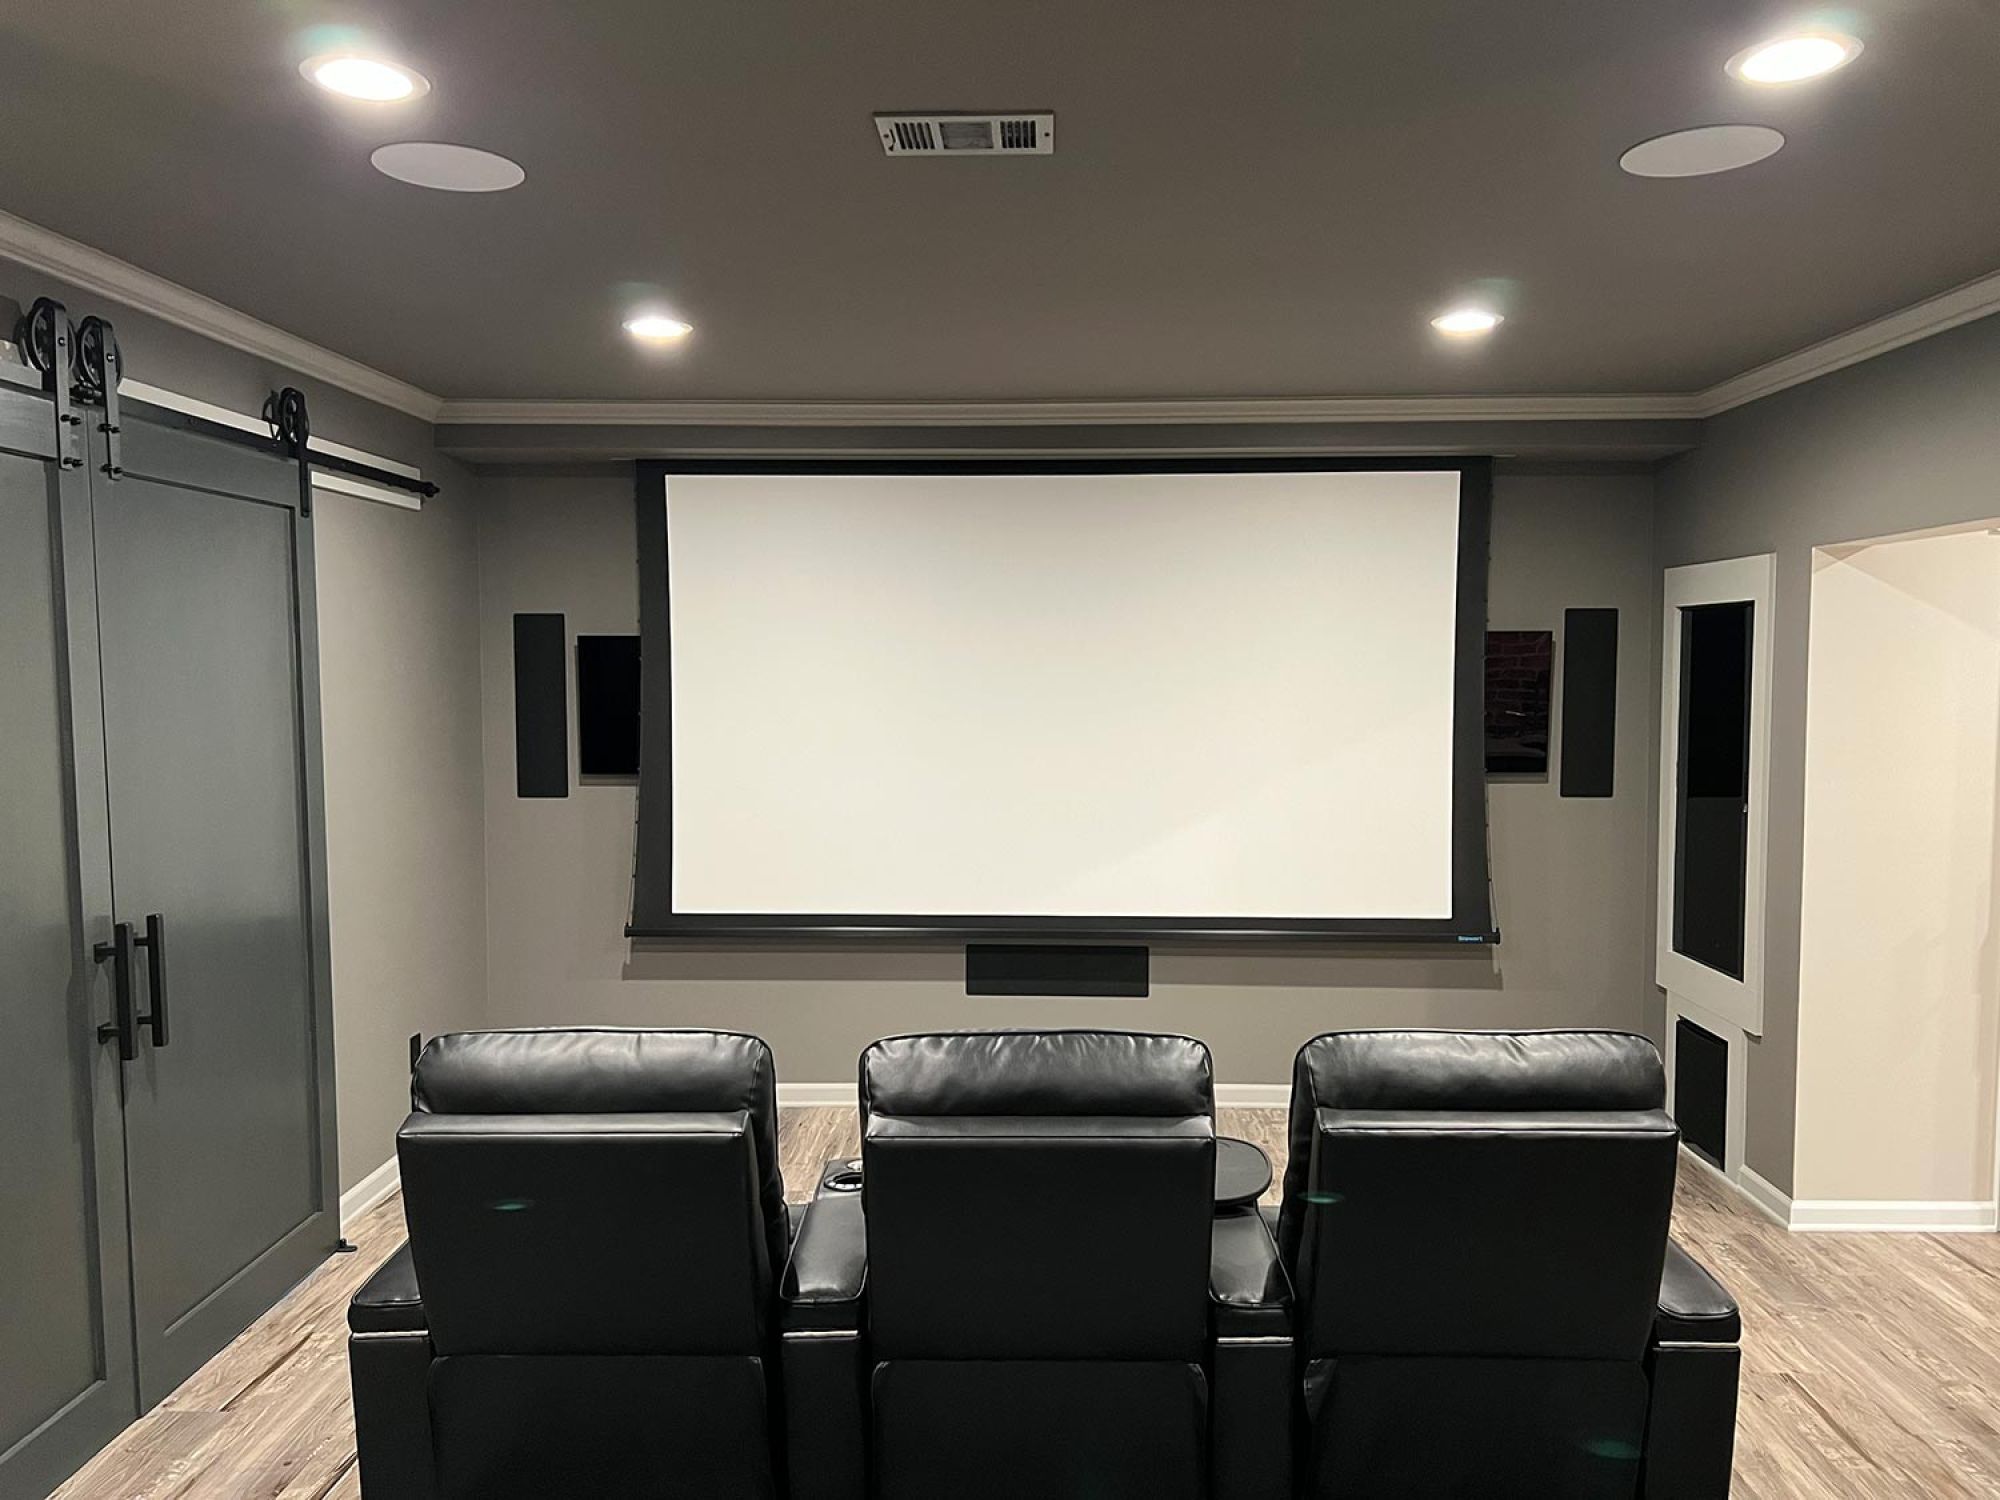 Home Theater Screen and In-wall speakers